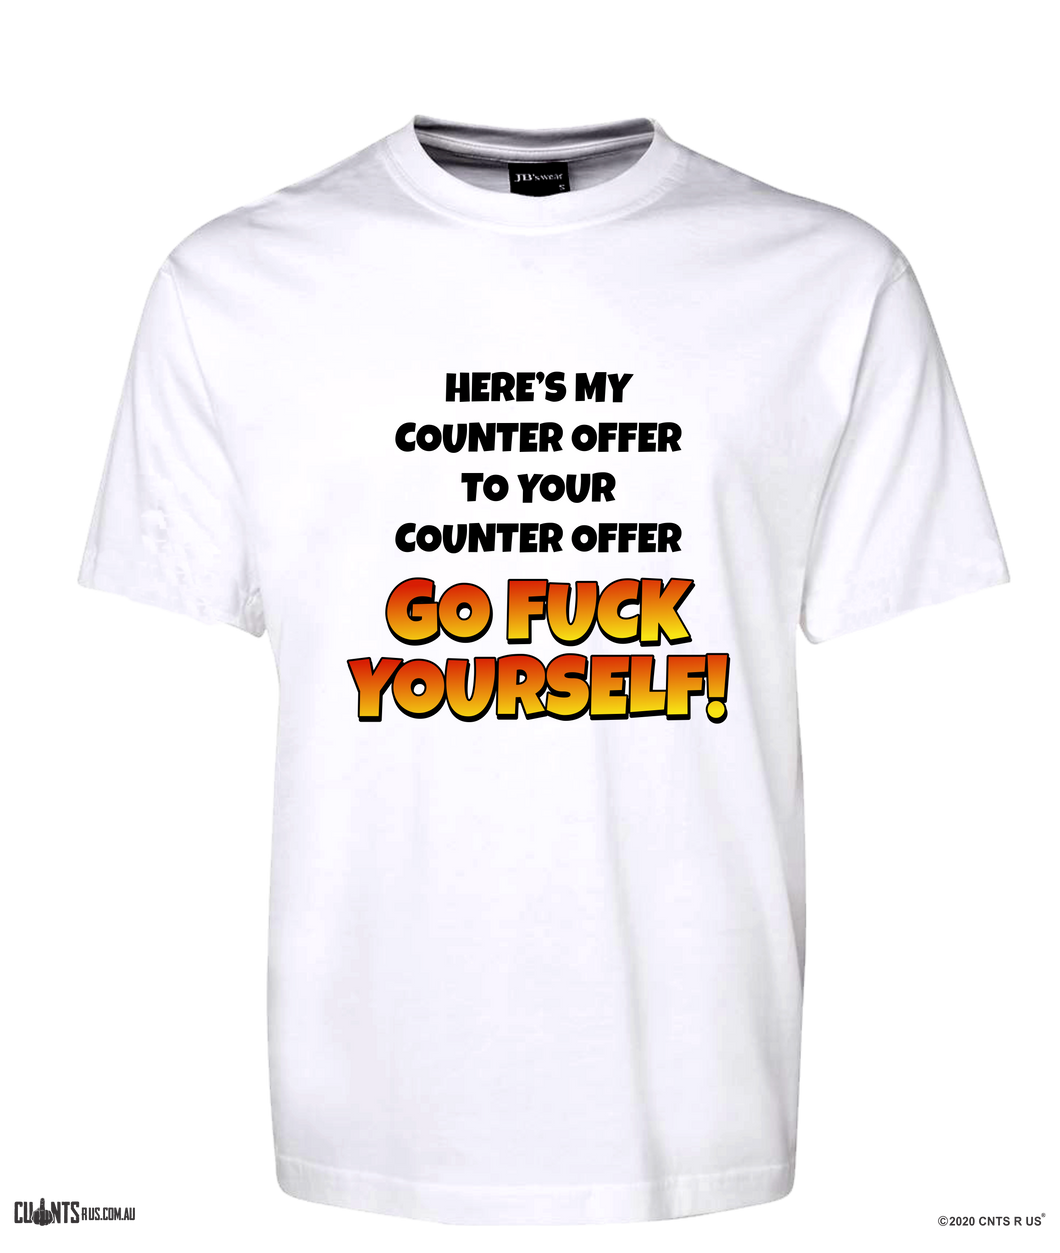 Here's My Counteroffer To Your Counteroffer Go Fuck Yourself Tee White T-Shirt CRU01-1HT-24027